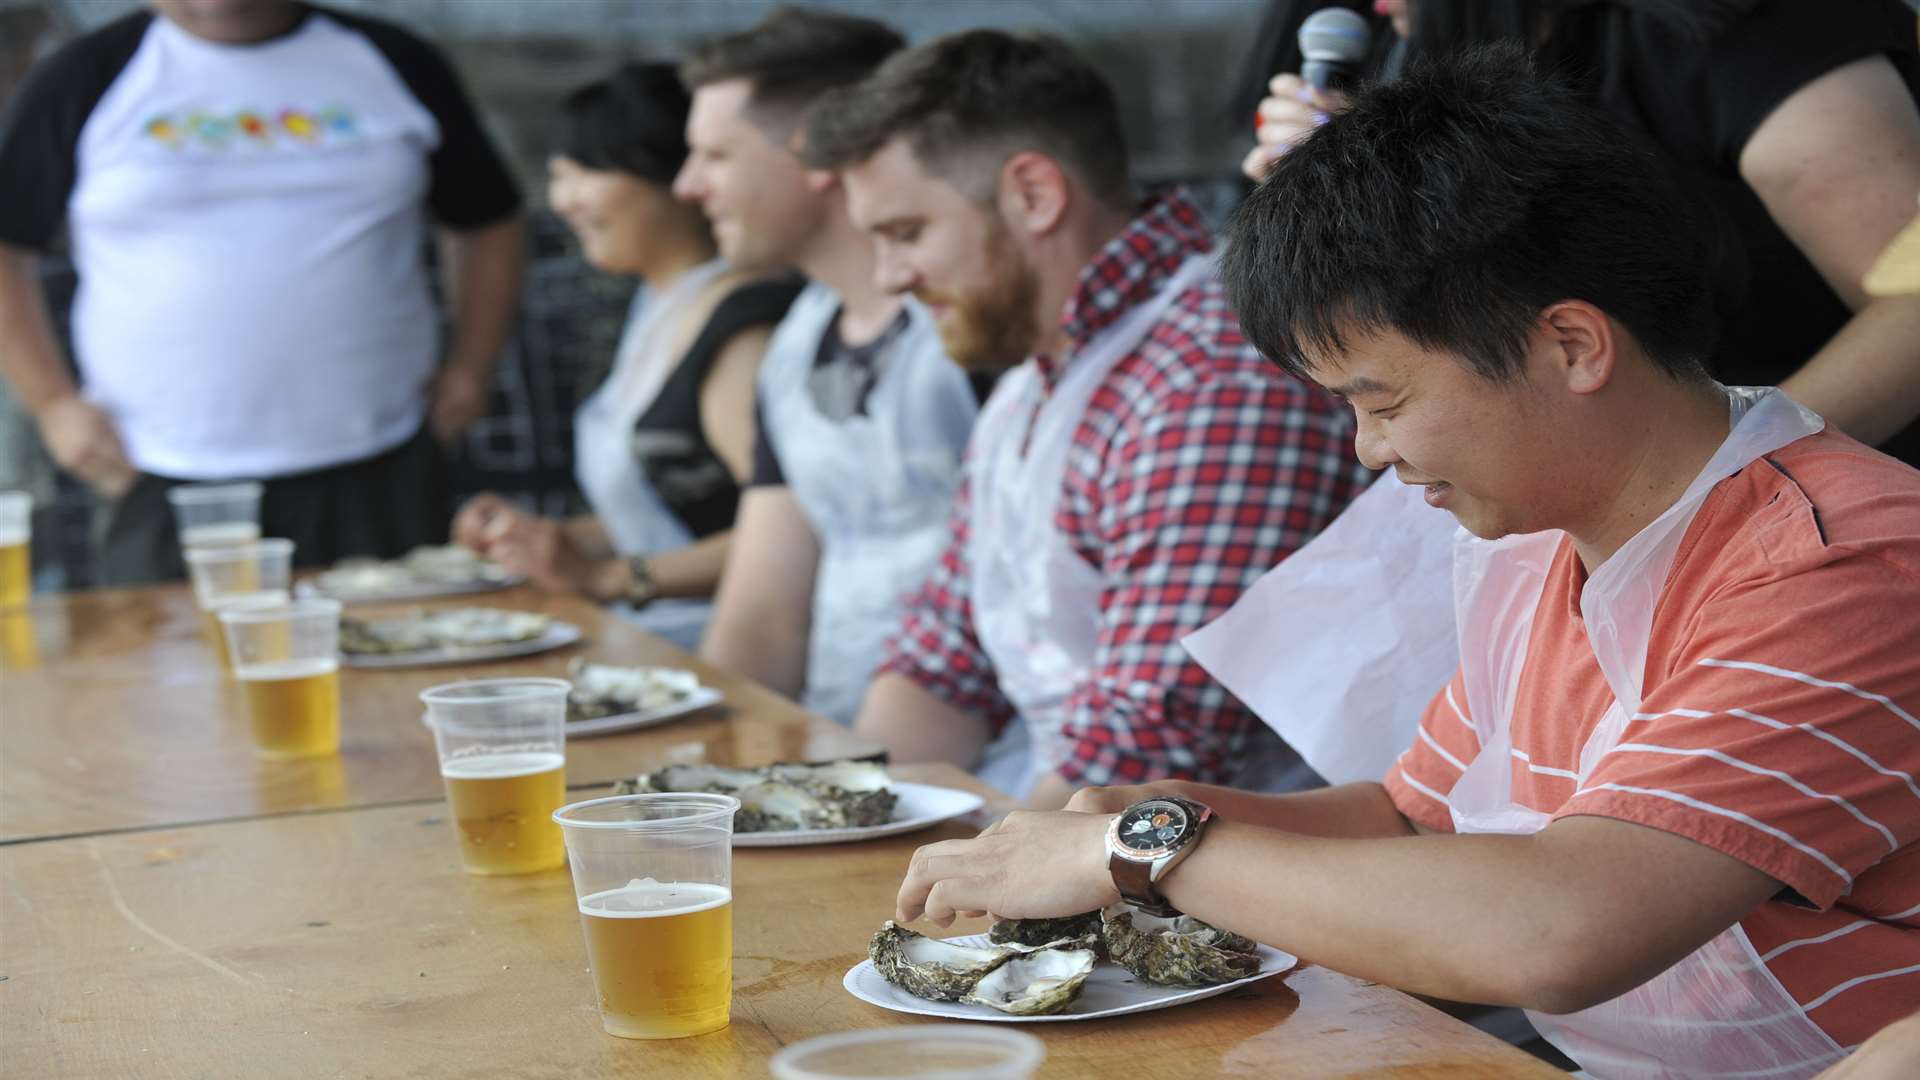 The oyster eating challenge will move to Tankerton Slopes.